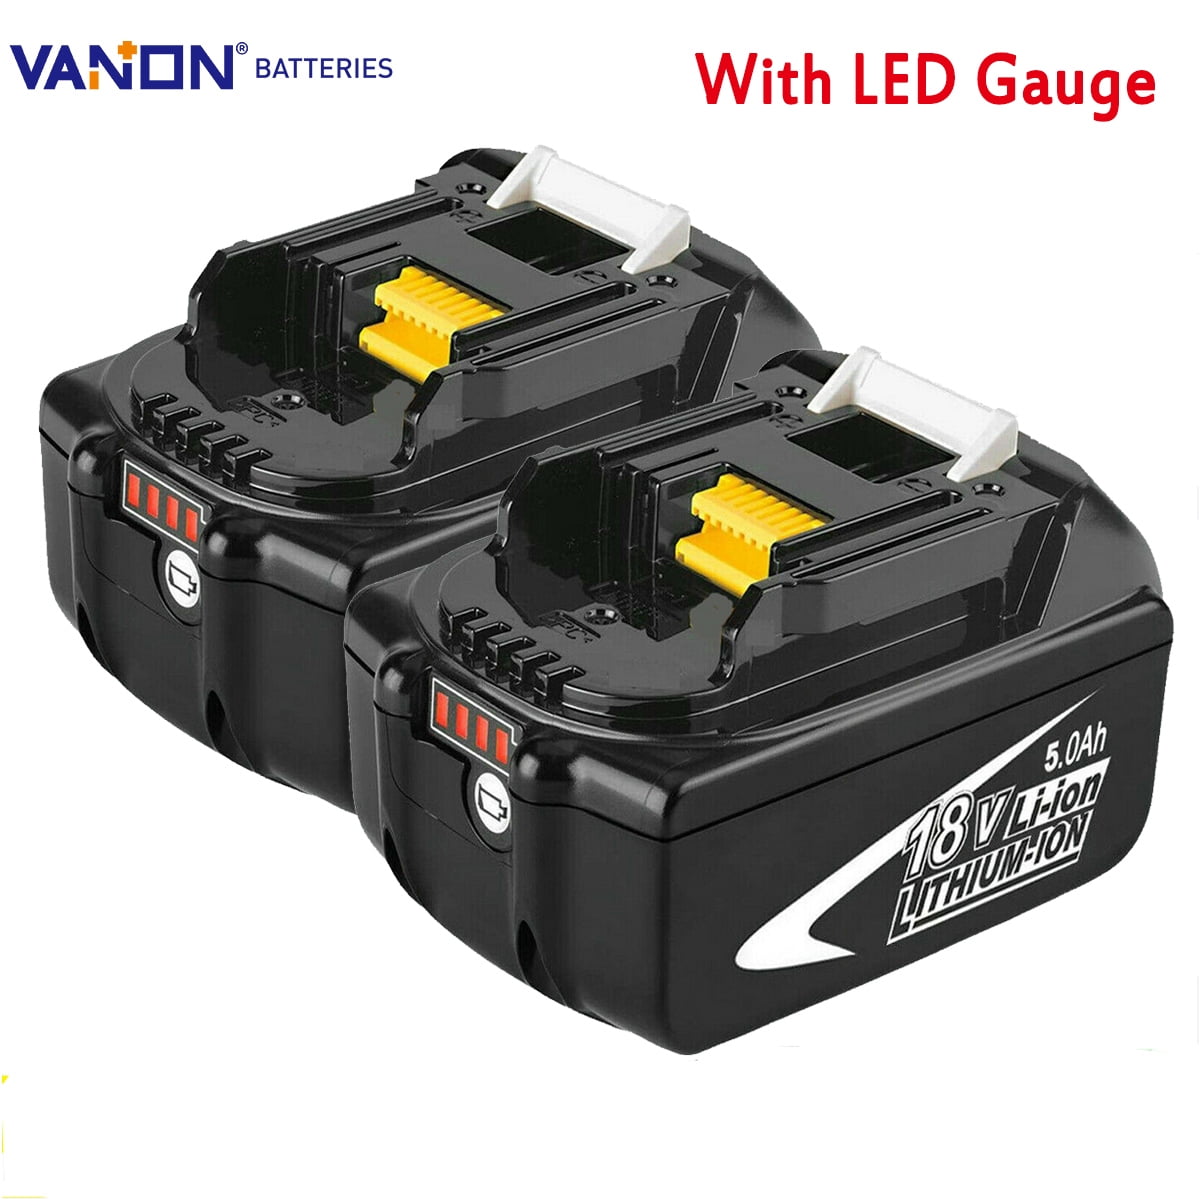 Charger 2X 5.0AH 18V Battery for Makita BL1840 BL1850 BL1860 with LED Display